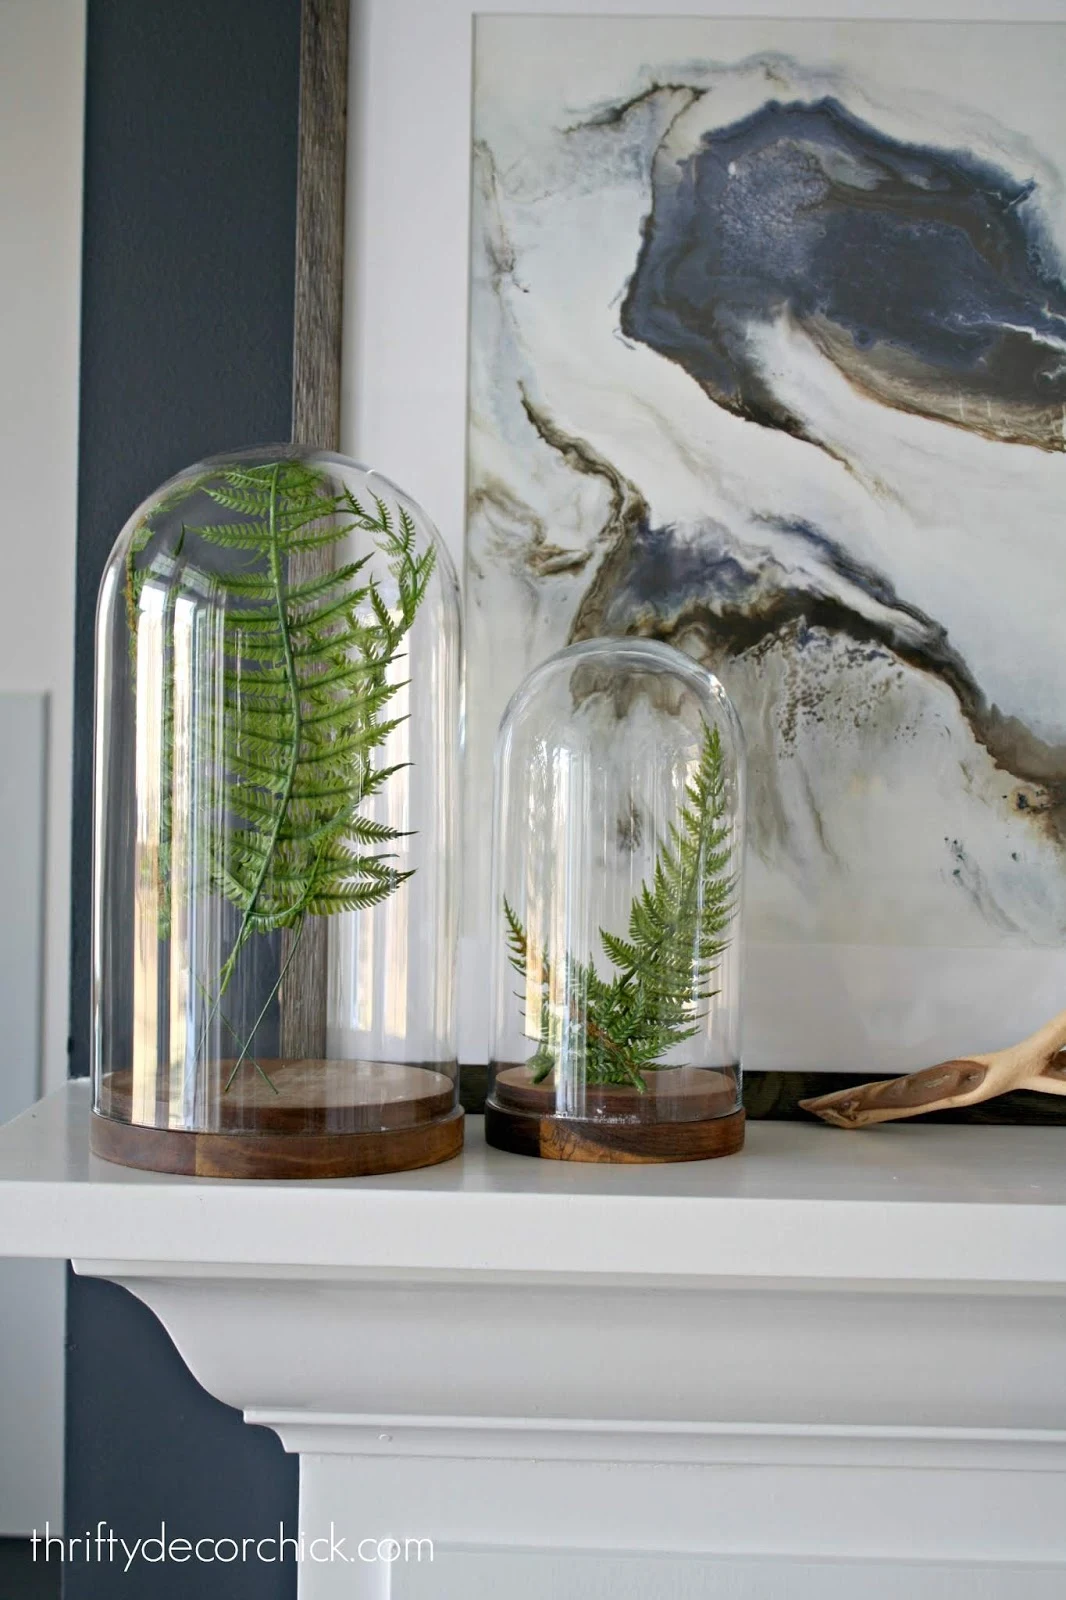 how to decorate with glass cloches